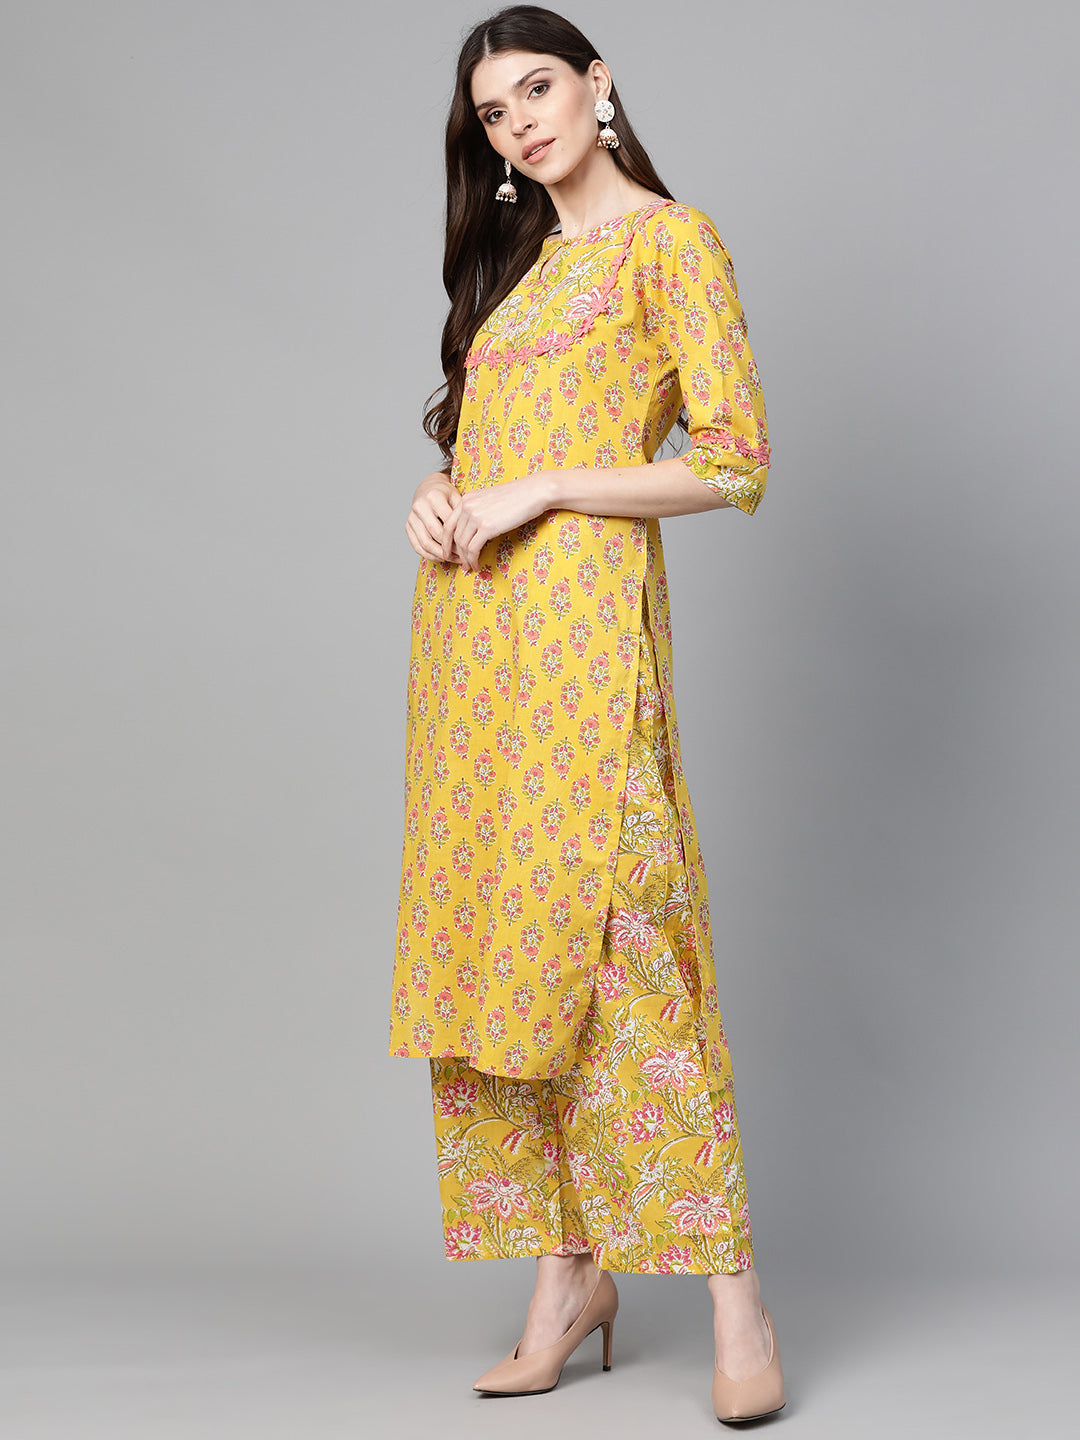 Women's Mustard Yellow And Coral Pink Floral Print Kurta With Palazzos - Bhama Couture